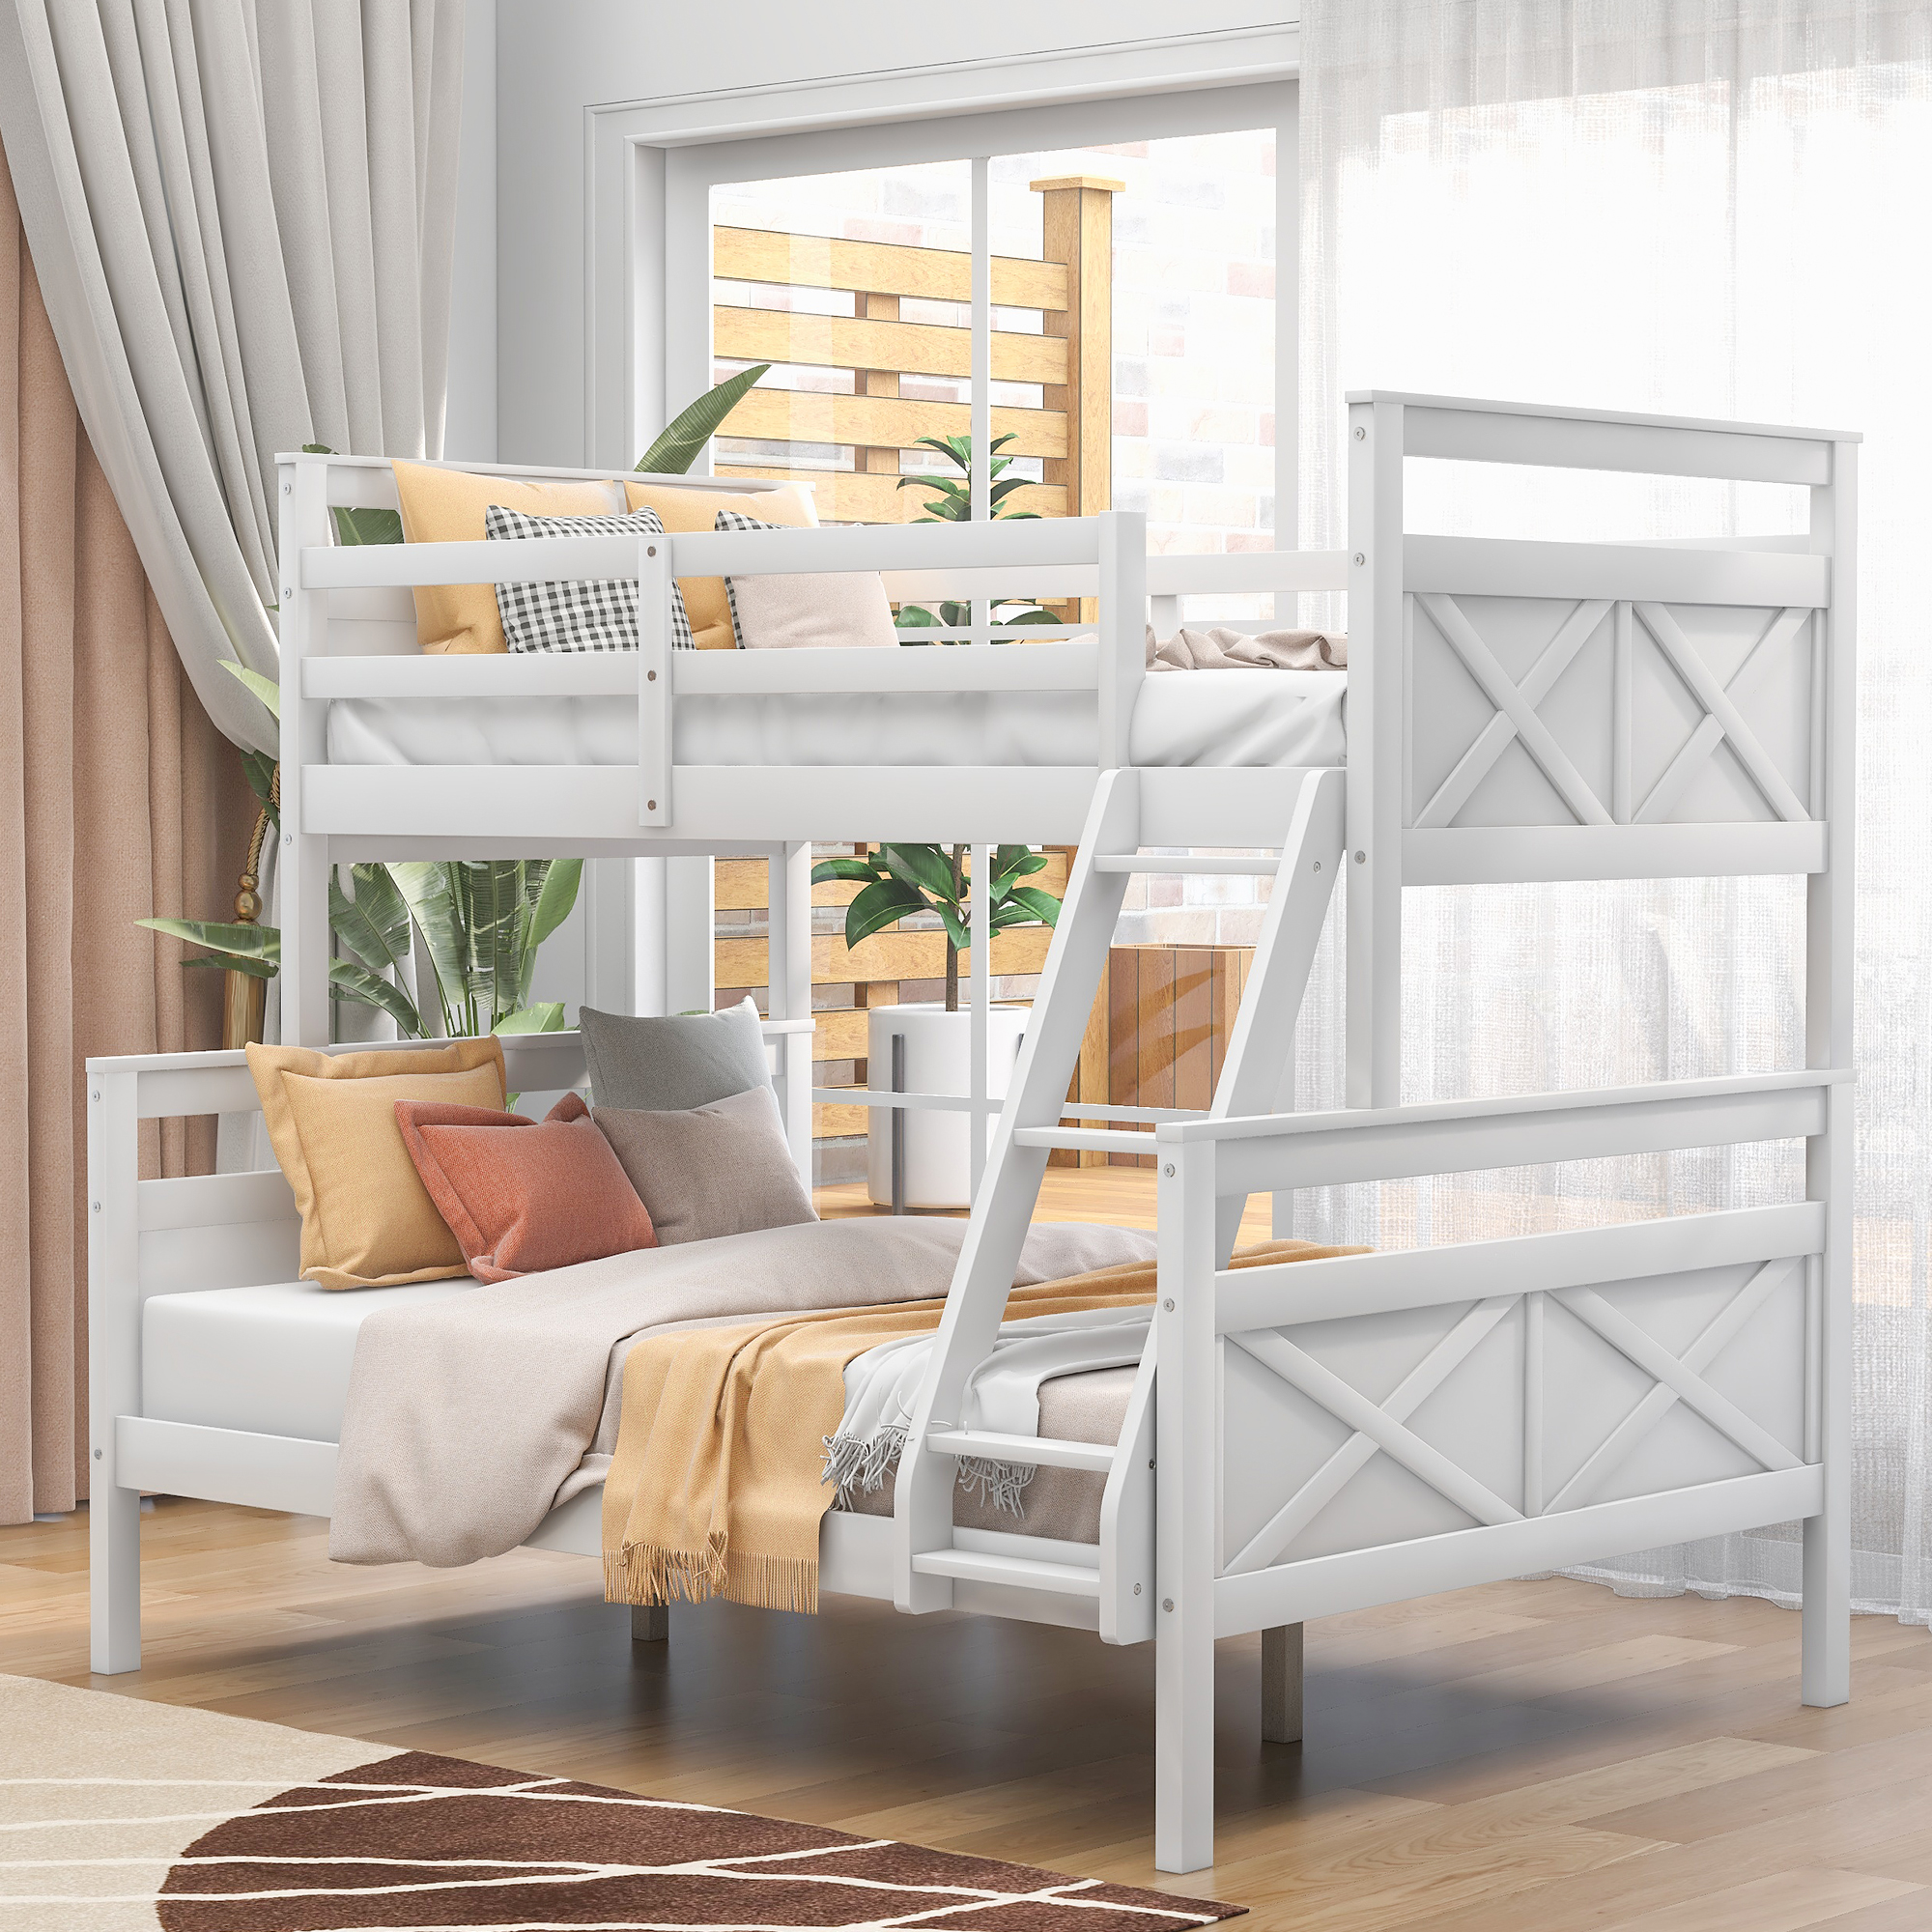 Twin over Full Bunk Bed with ladder, Safety Guardrail, Perfect for Bedroom, White-CASAINC